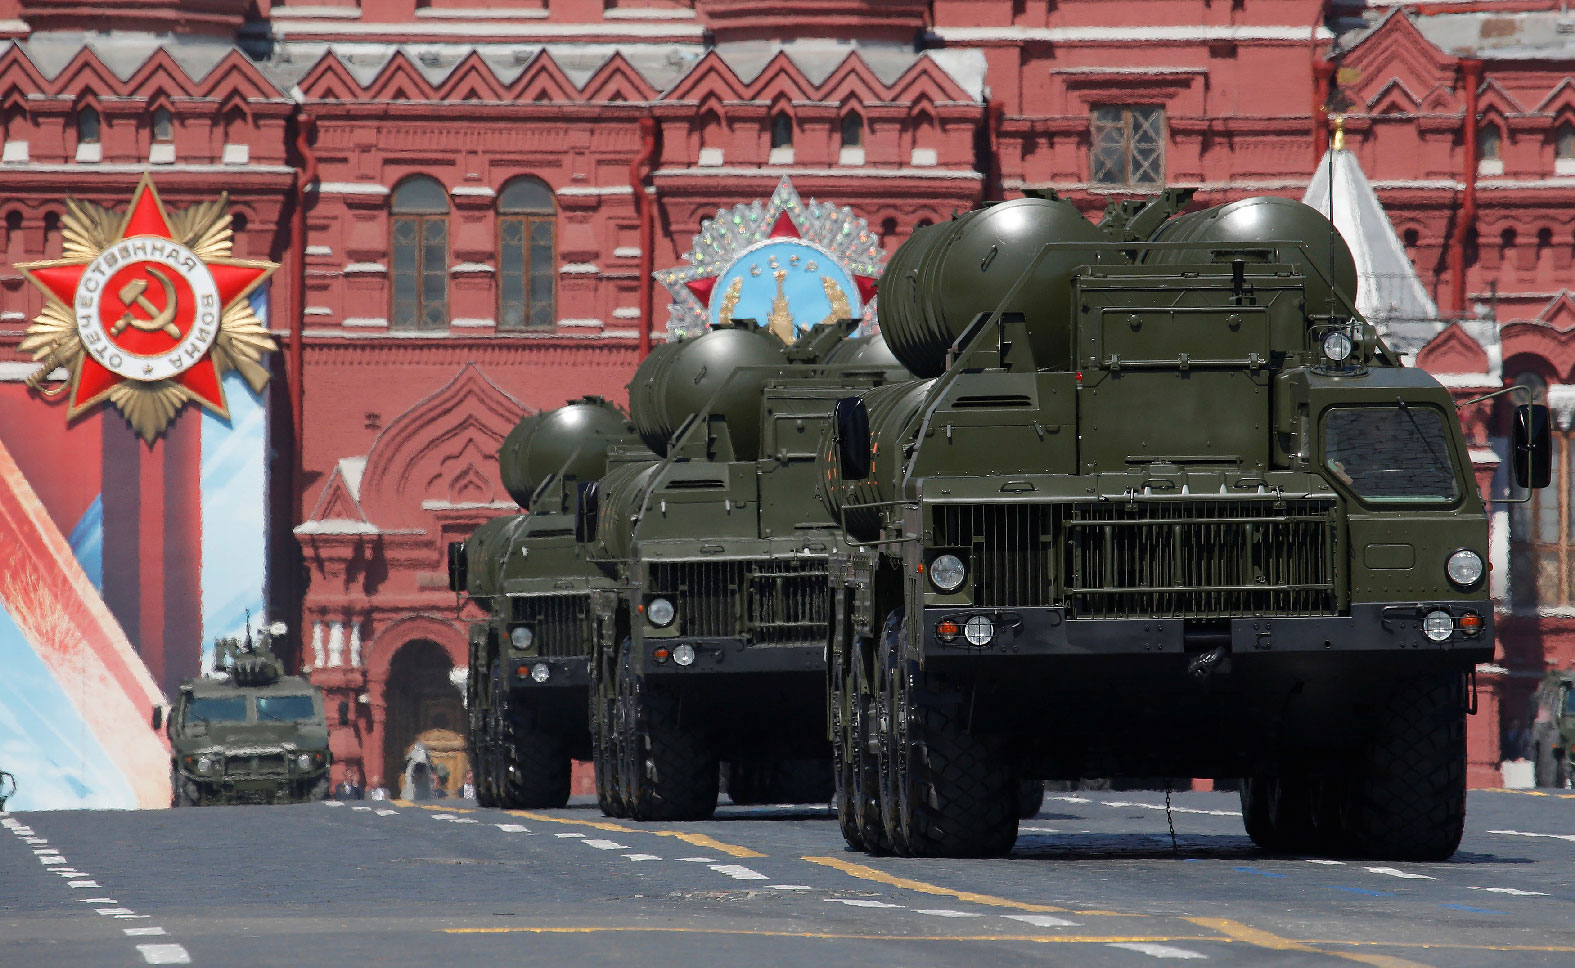 Russian S-400 Triumph medium-range and long-range surface-to-air missile systems drive during the Victory Day parade, marking the 71st anniversary of the victory over Nazi Germany in World War Two, at Red Square in Moscow, Russia, May 9, 2016.